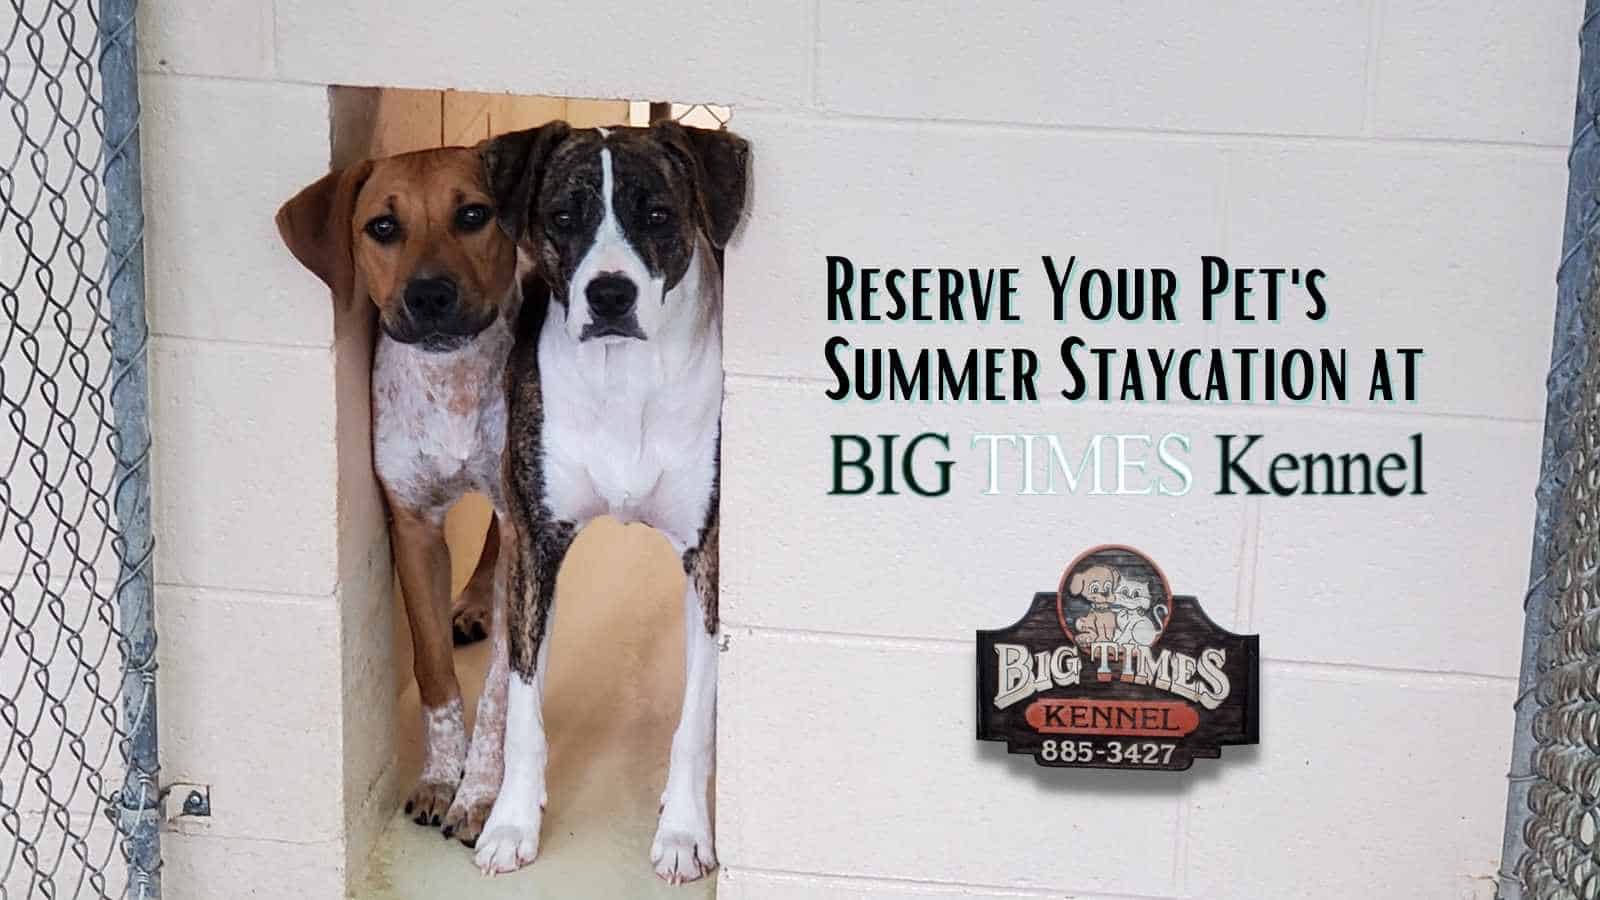 Reserve Your Pet’s Summer Staycation at Big Times Kennel!